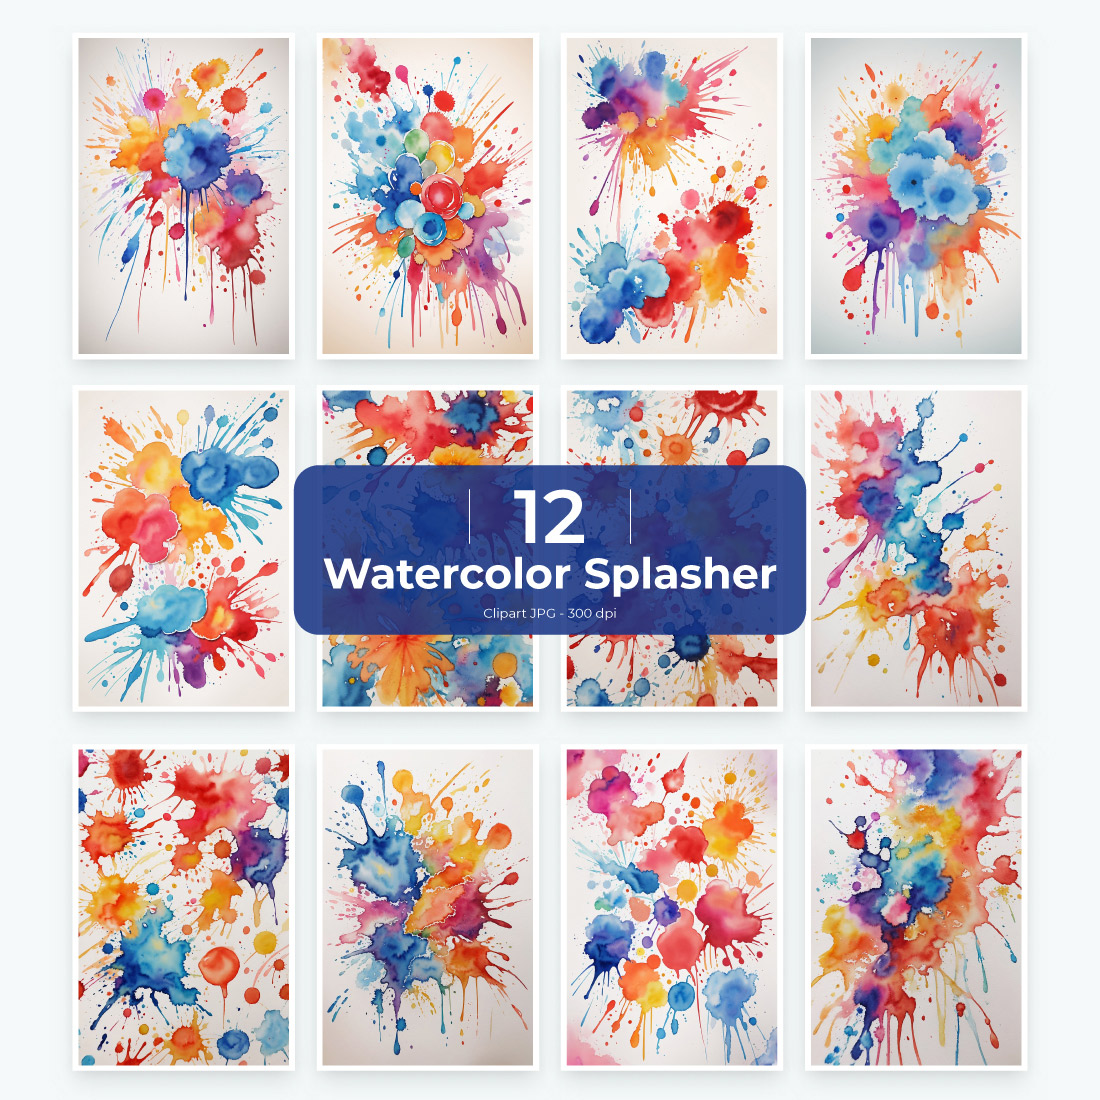 Abstract watercolor splash and stains watercolor png cover image.